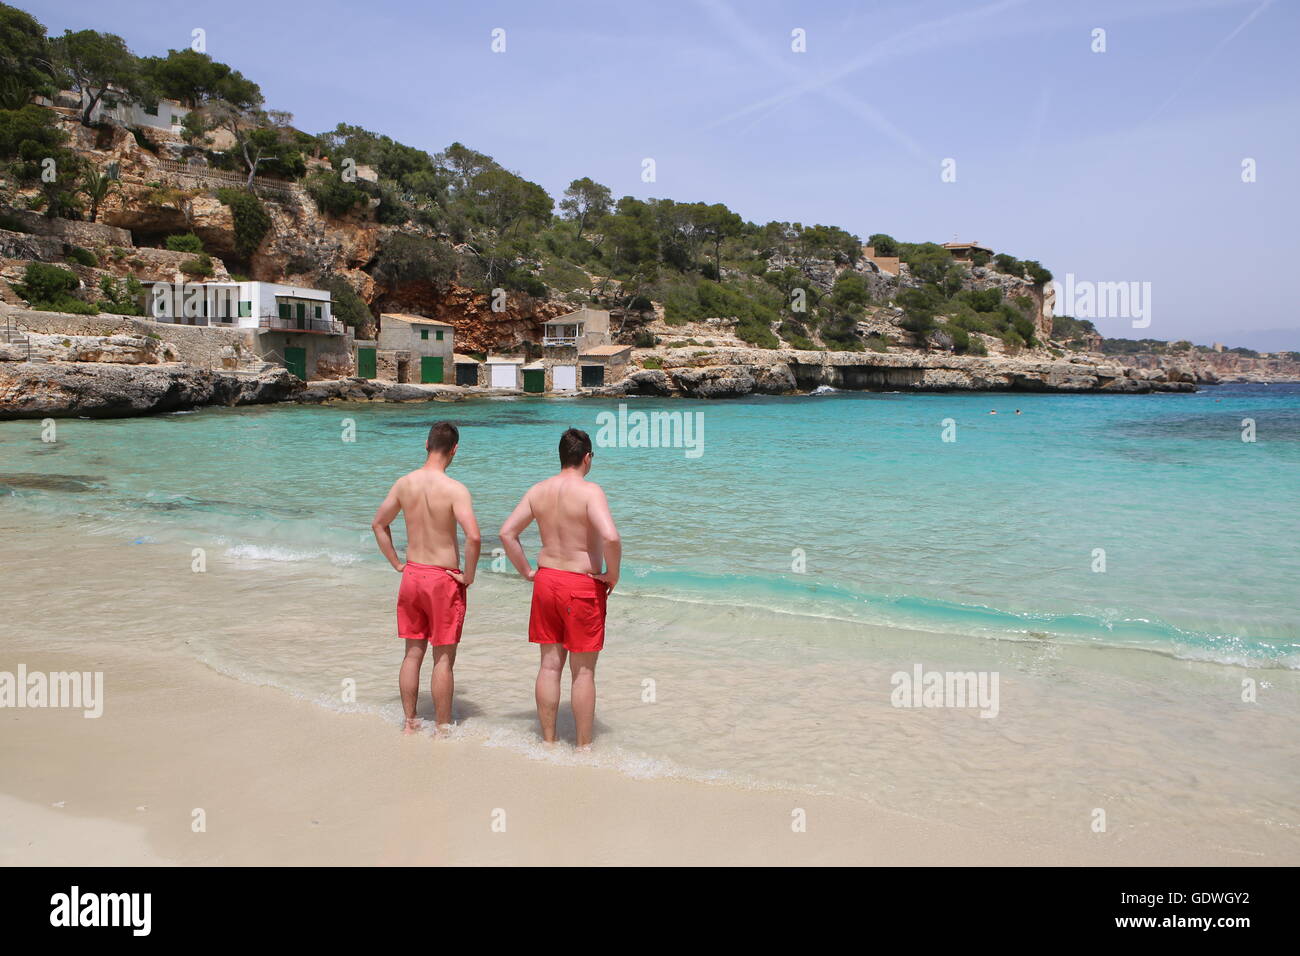 Two boys with the same red swimsuit looking at the sea in the beautiful Cala Llombards, south of Mallorca Stock Photo